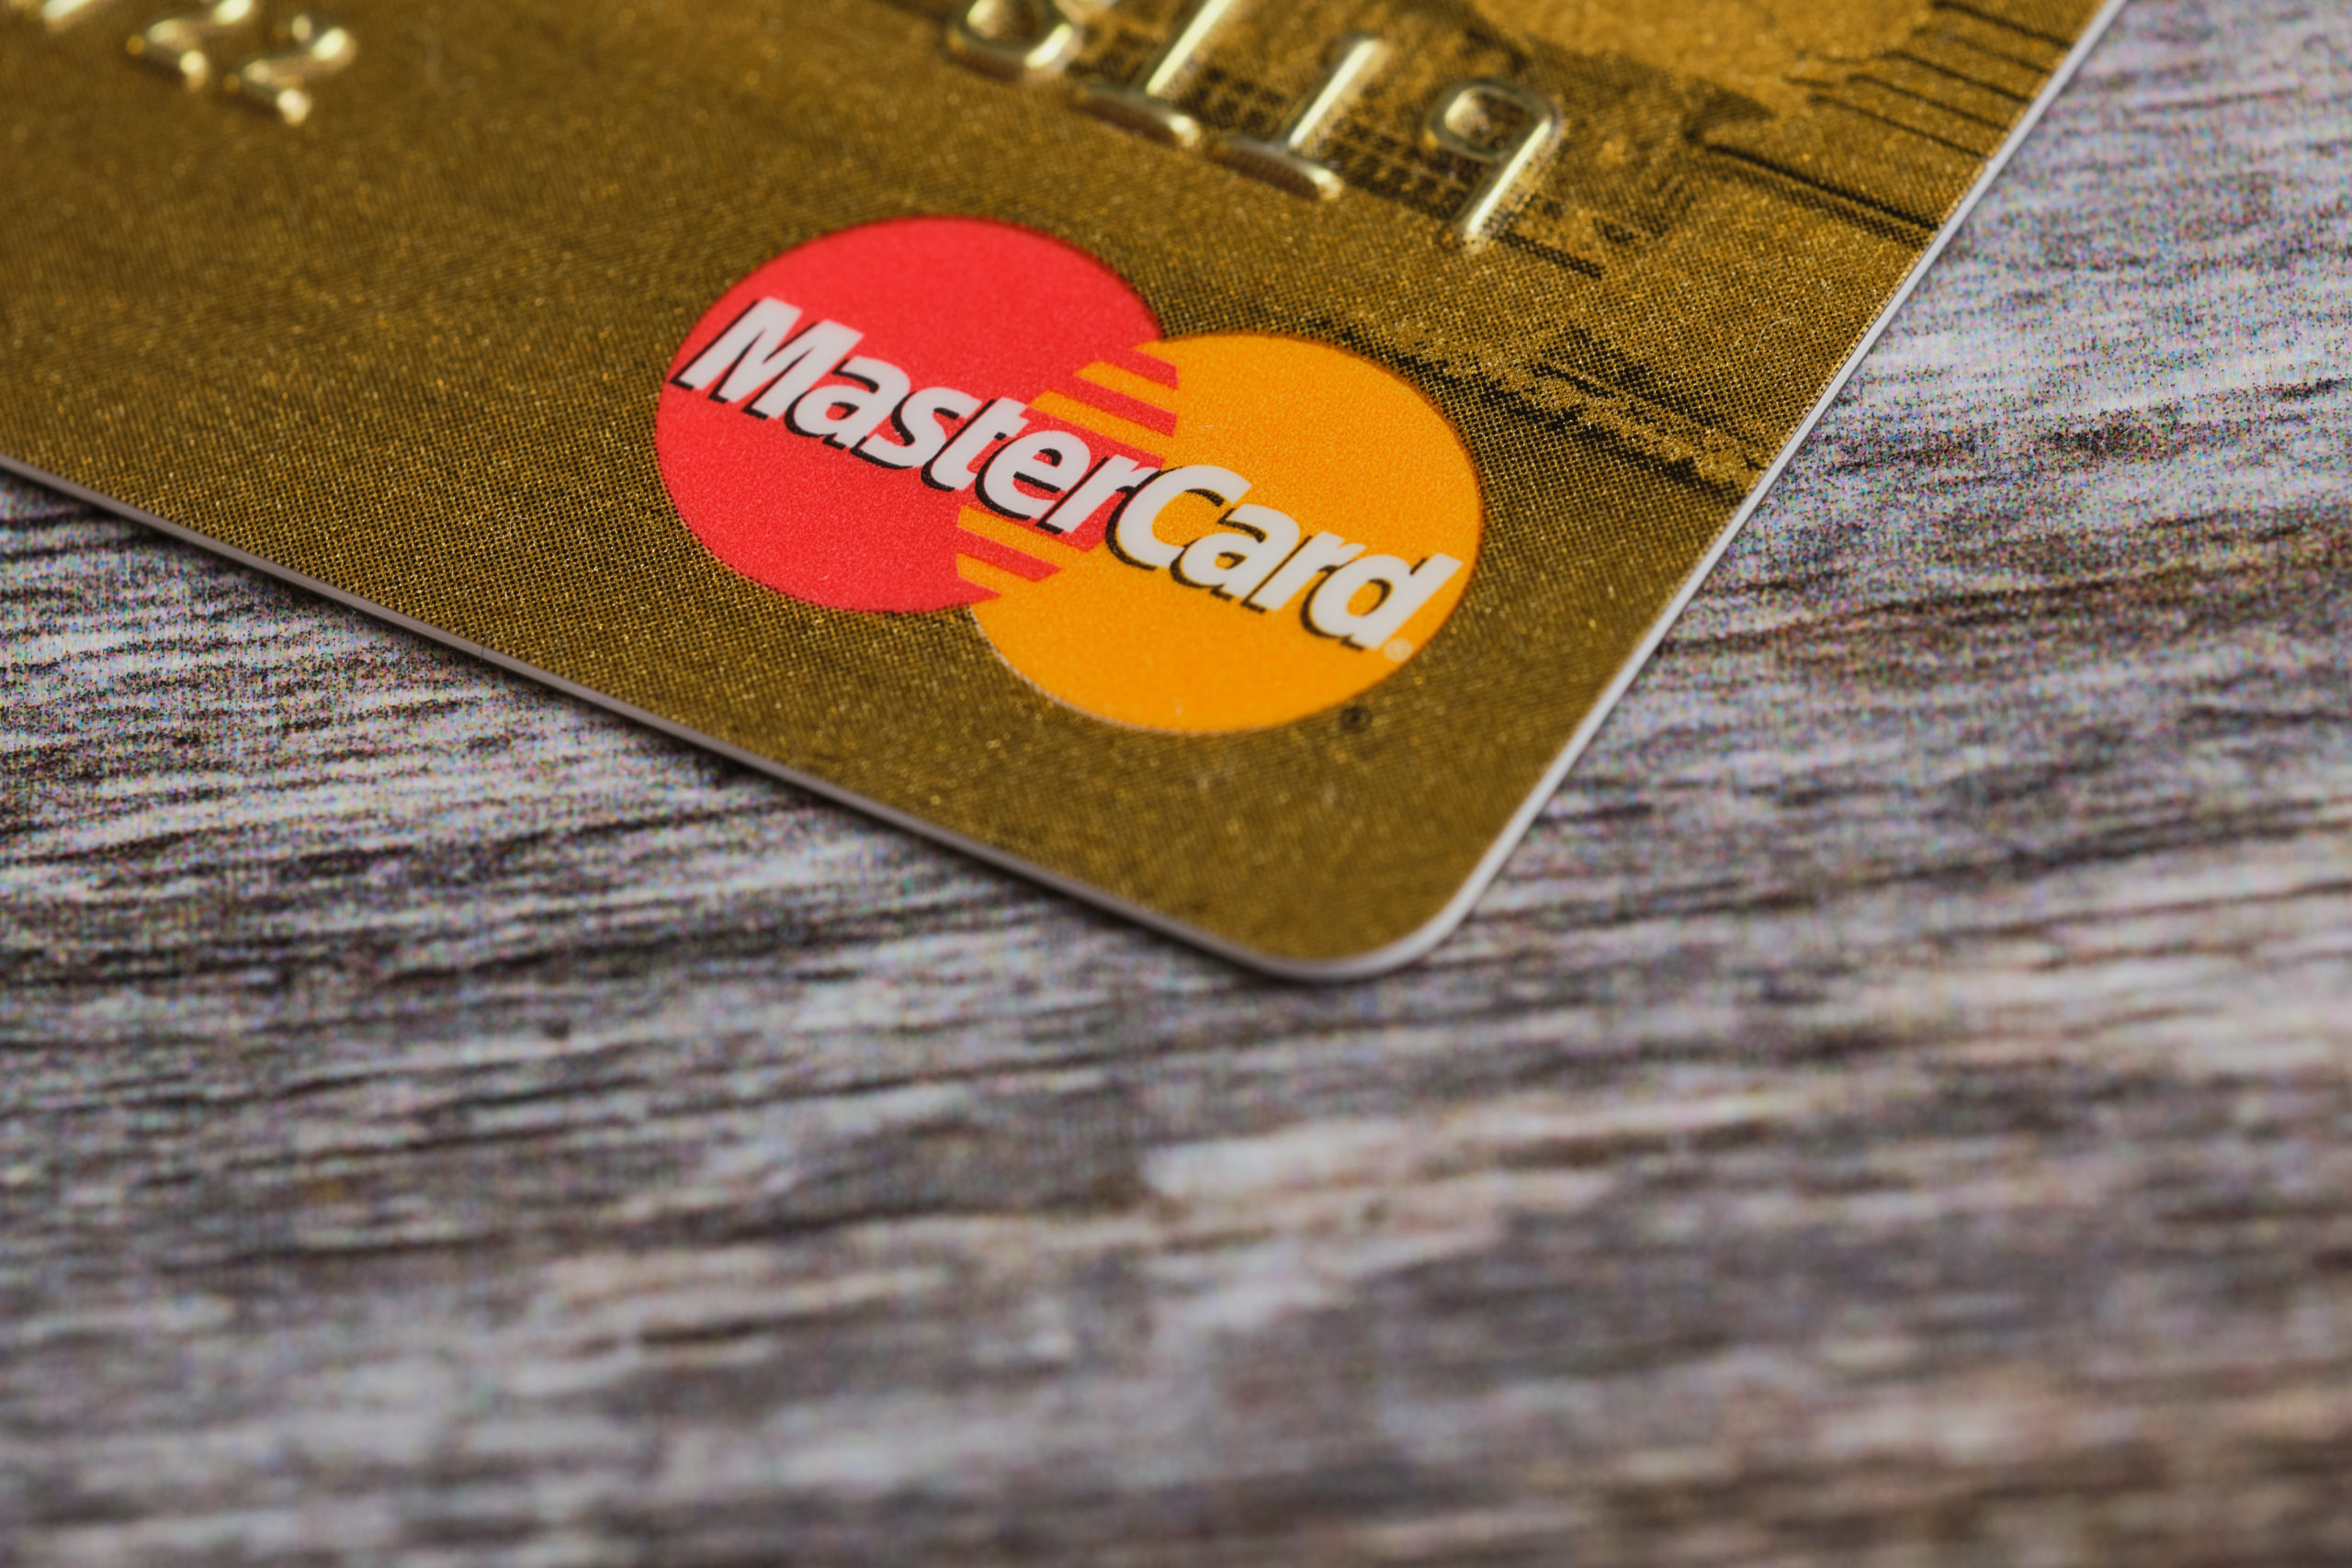 Mastercard: Banned cards from being issued or used in Russia, 2022, A debit card. 2560x1710 HD Wallpaper.